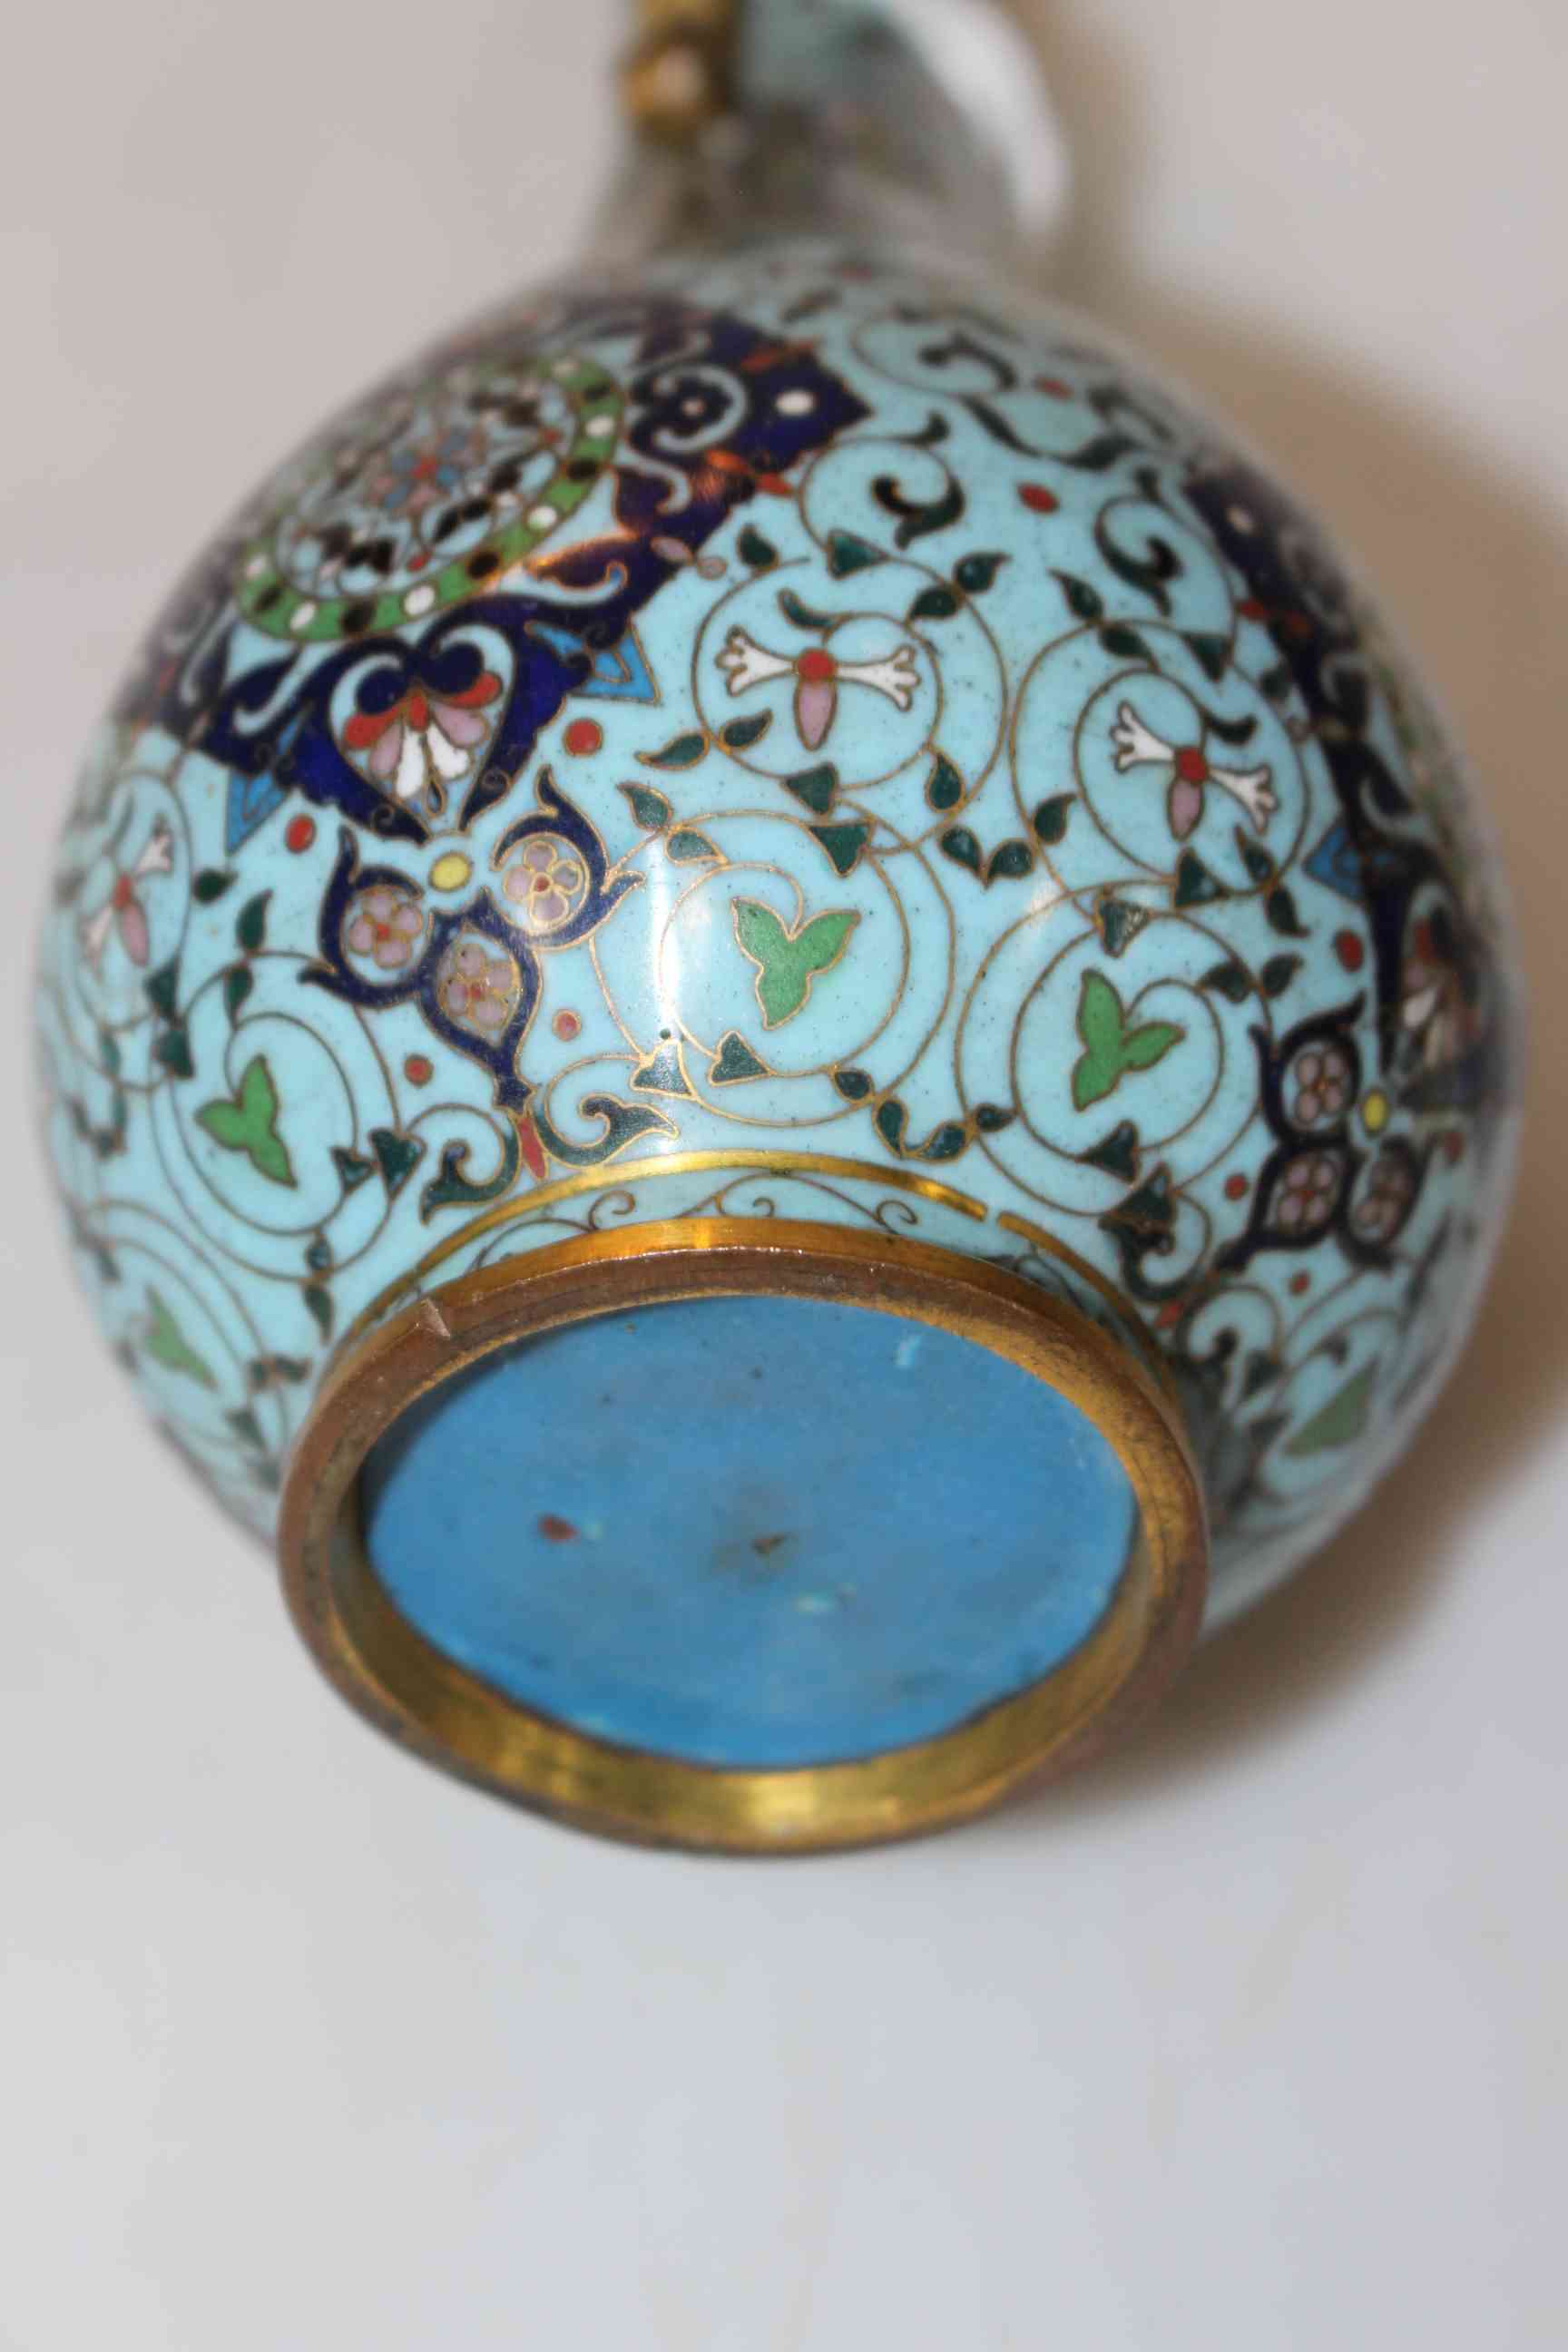 Fine antique Chinese cloisonne vase, with intricate decoration and scrolled side handles, 15cm high, - Image 5 of 5